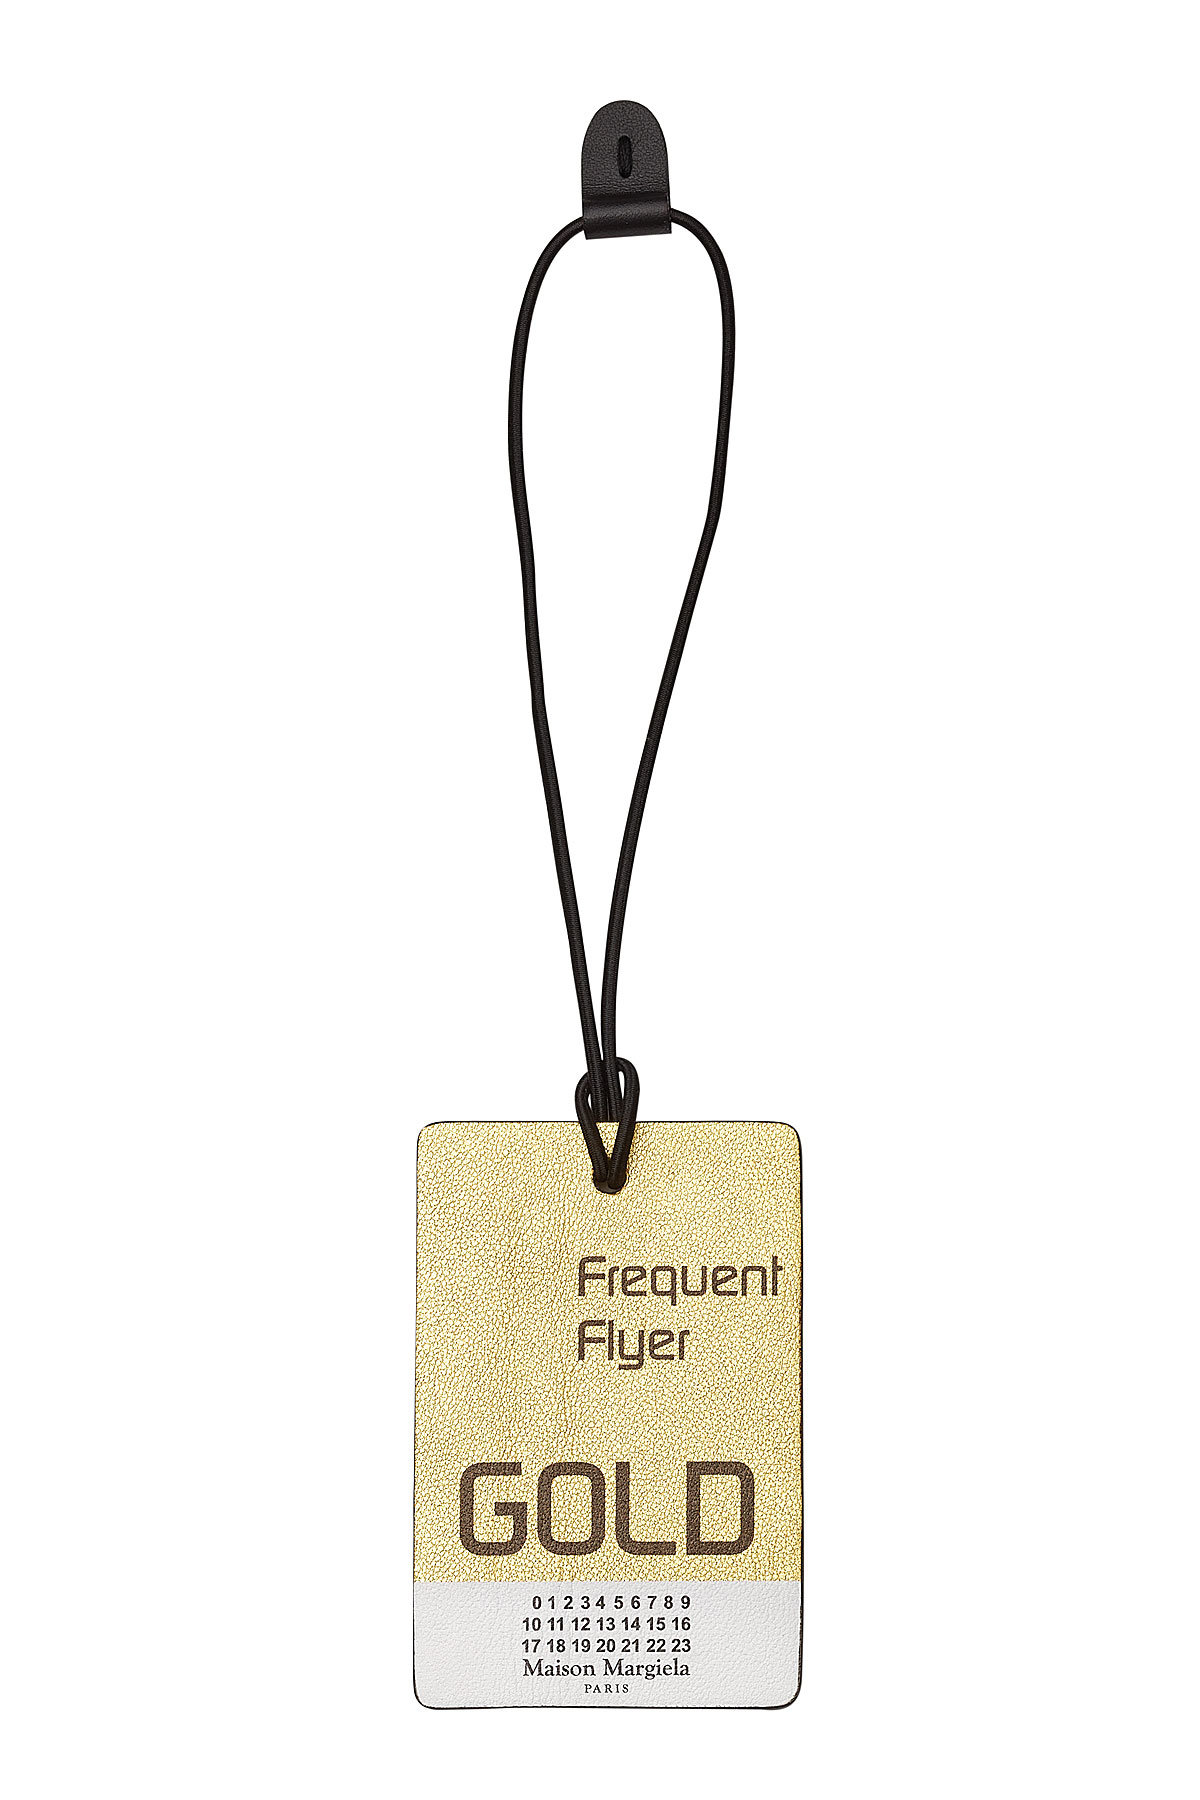 Frequent Flyer Luggage Tag by Maison Margiela